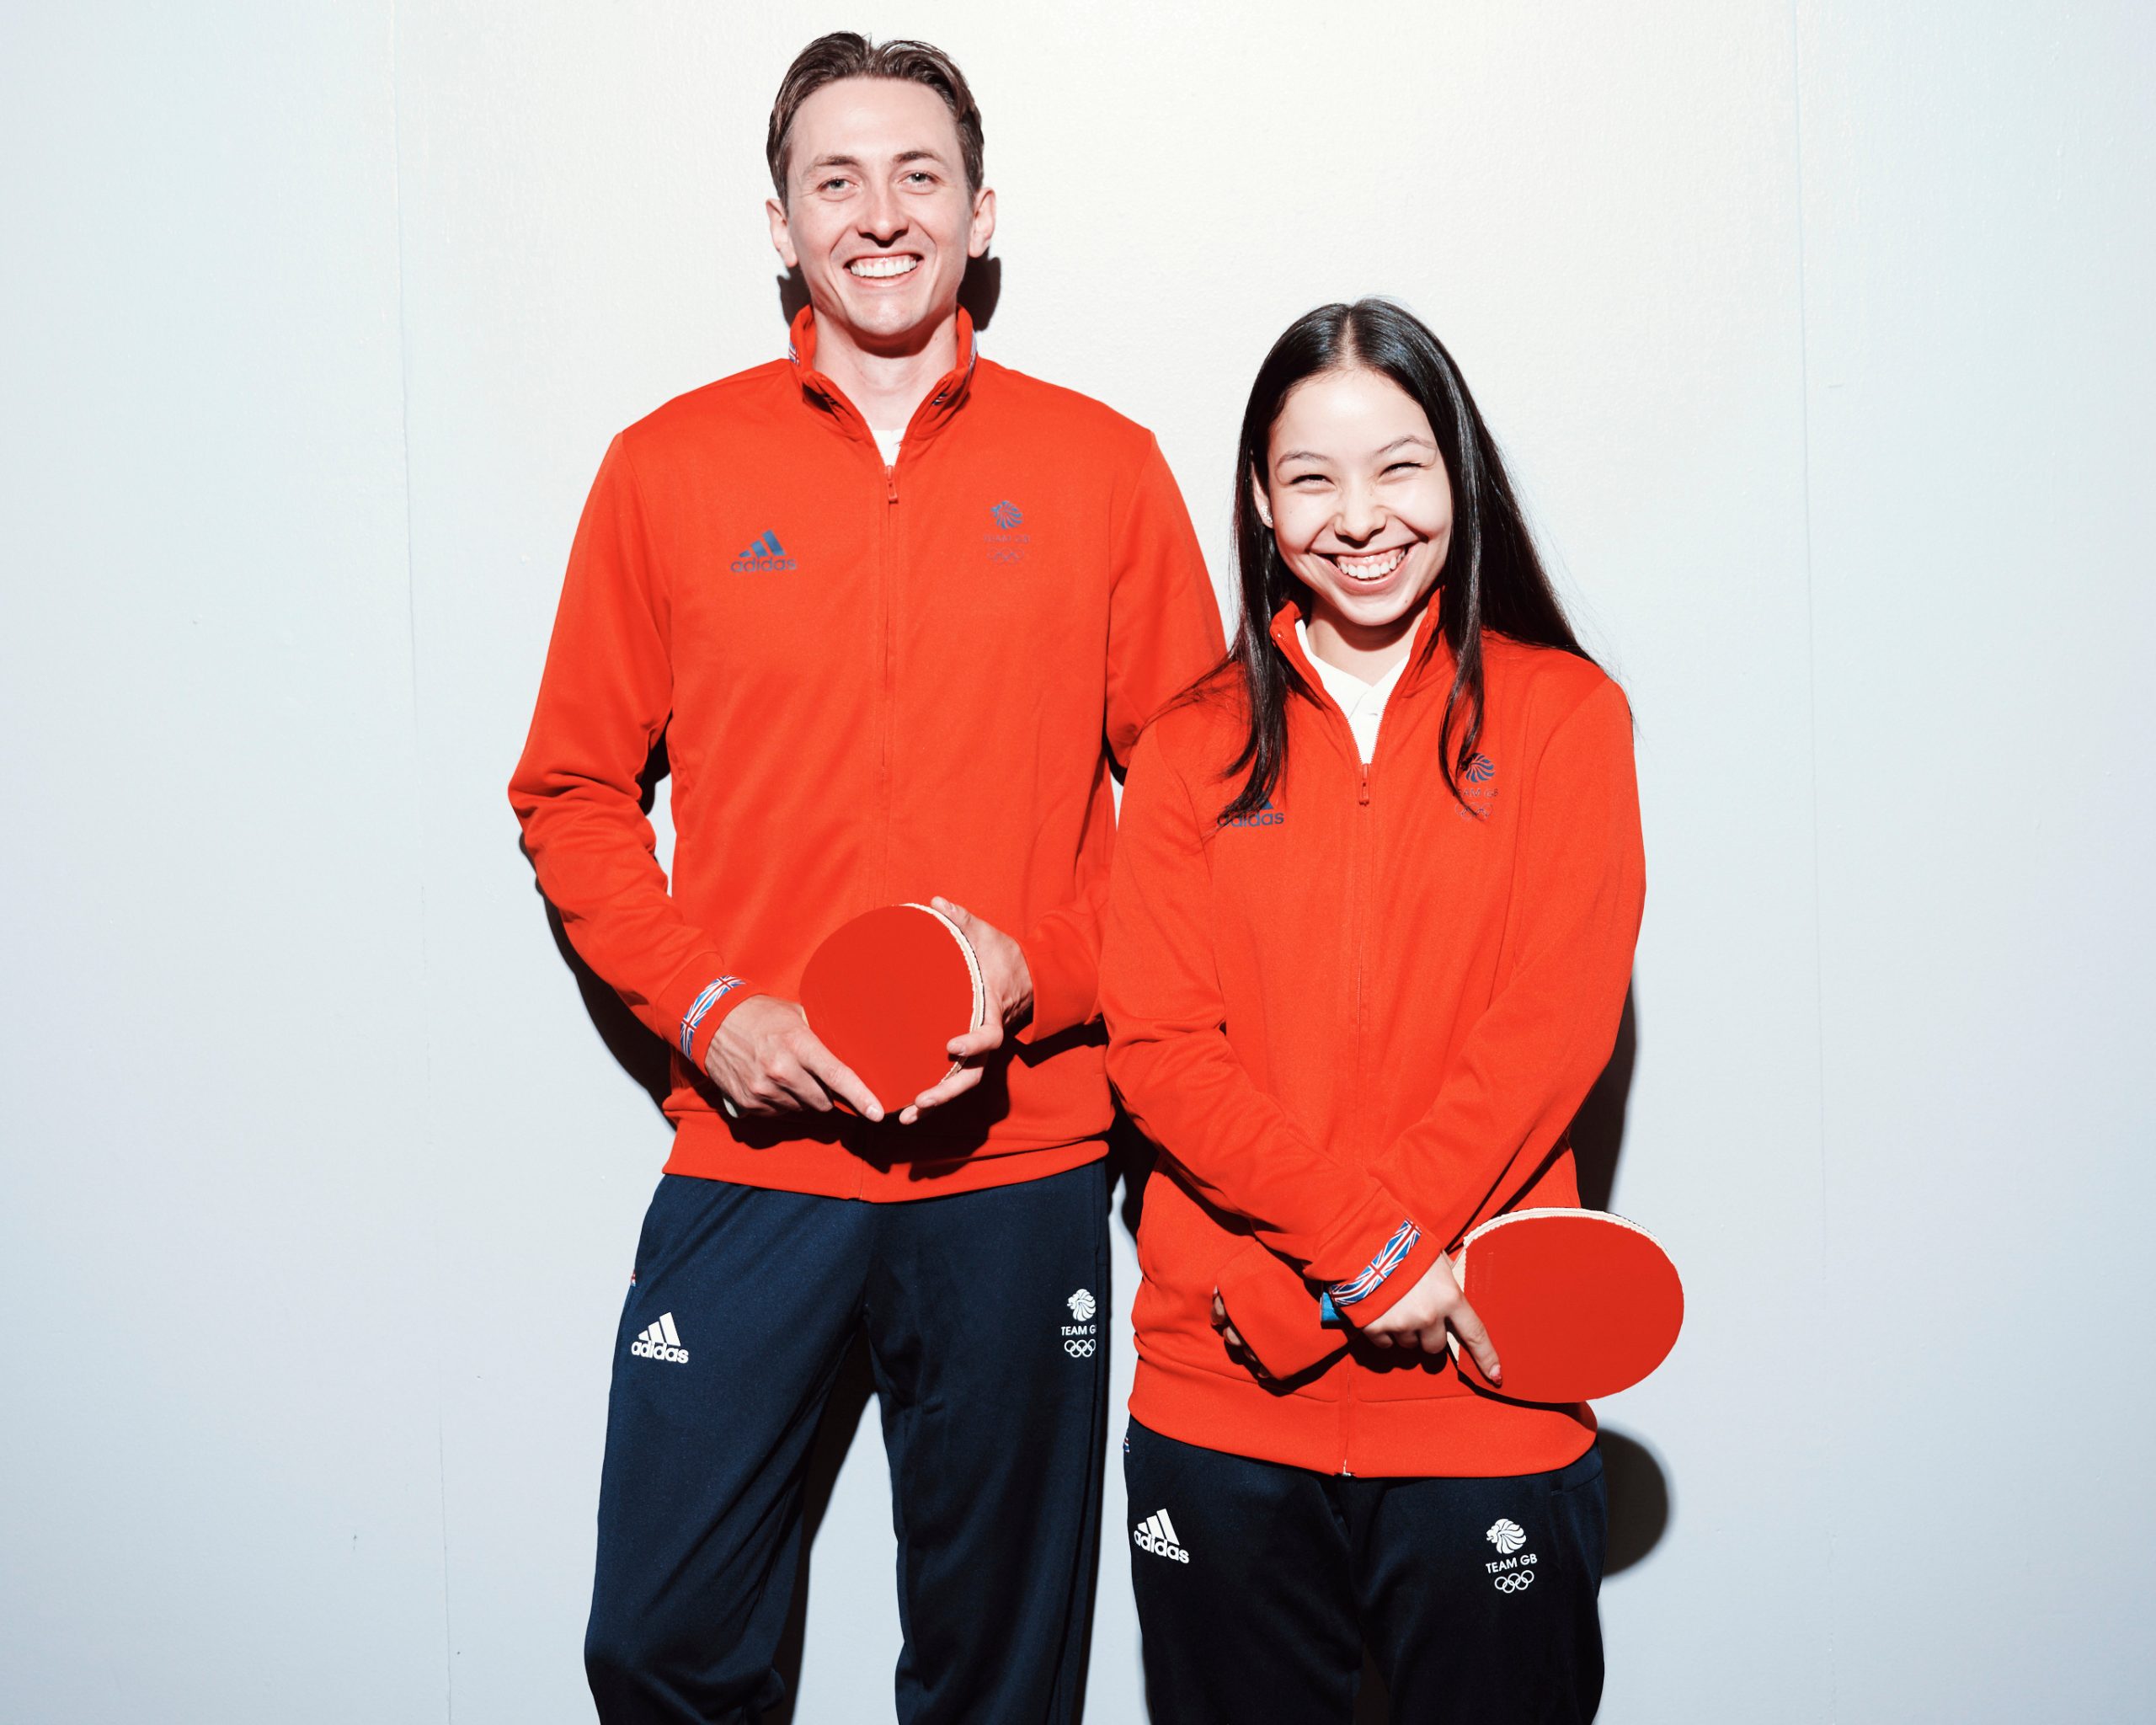 Liam Pitchford and Anna Hursey confirmed for Paris 2024!